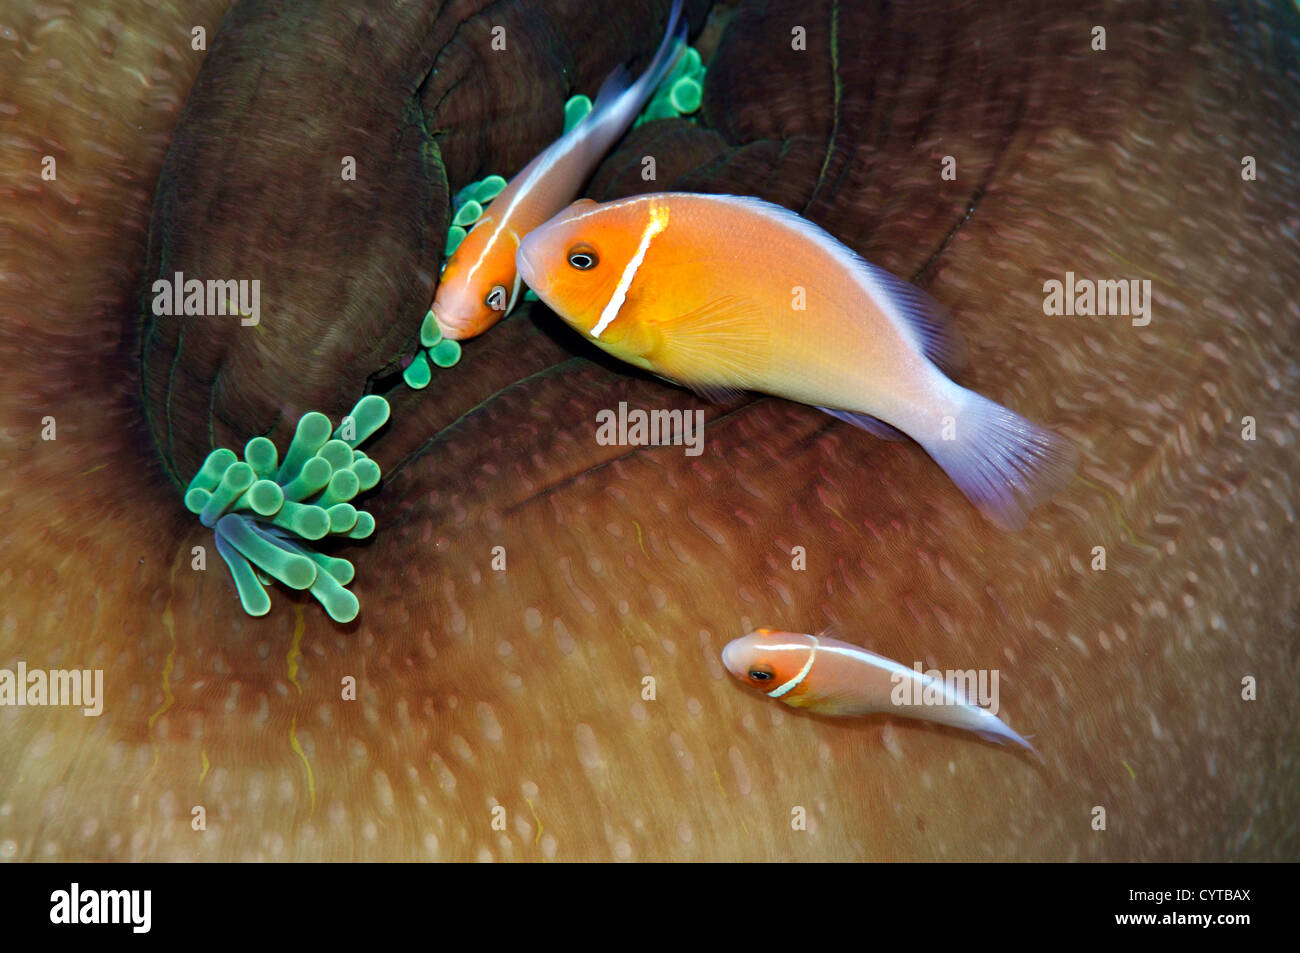 Three pink anemonefish, Amphiprion perideraion, share the same host anemone, Pohnpei, Federated States of Micronesia Stock Photo